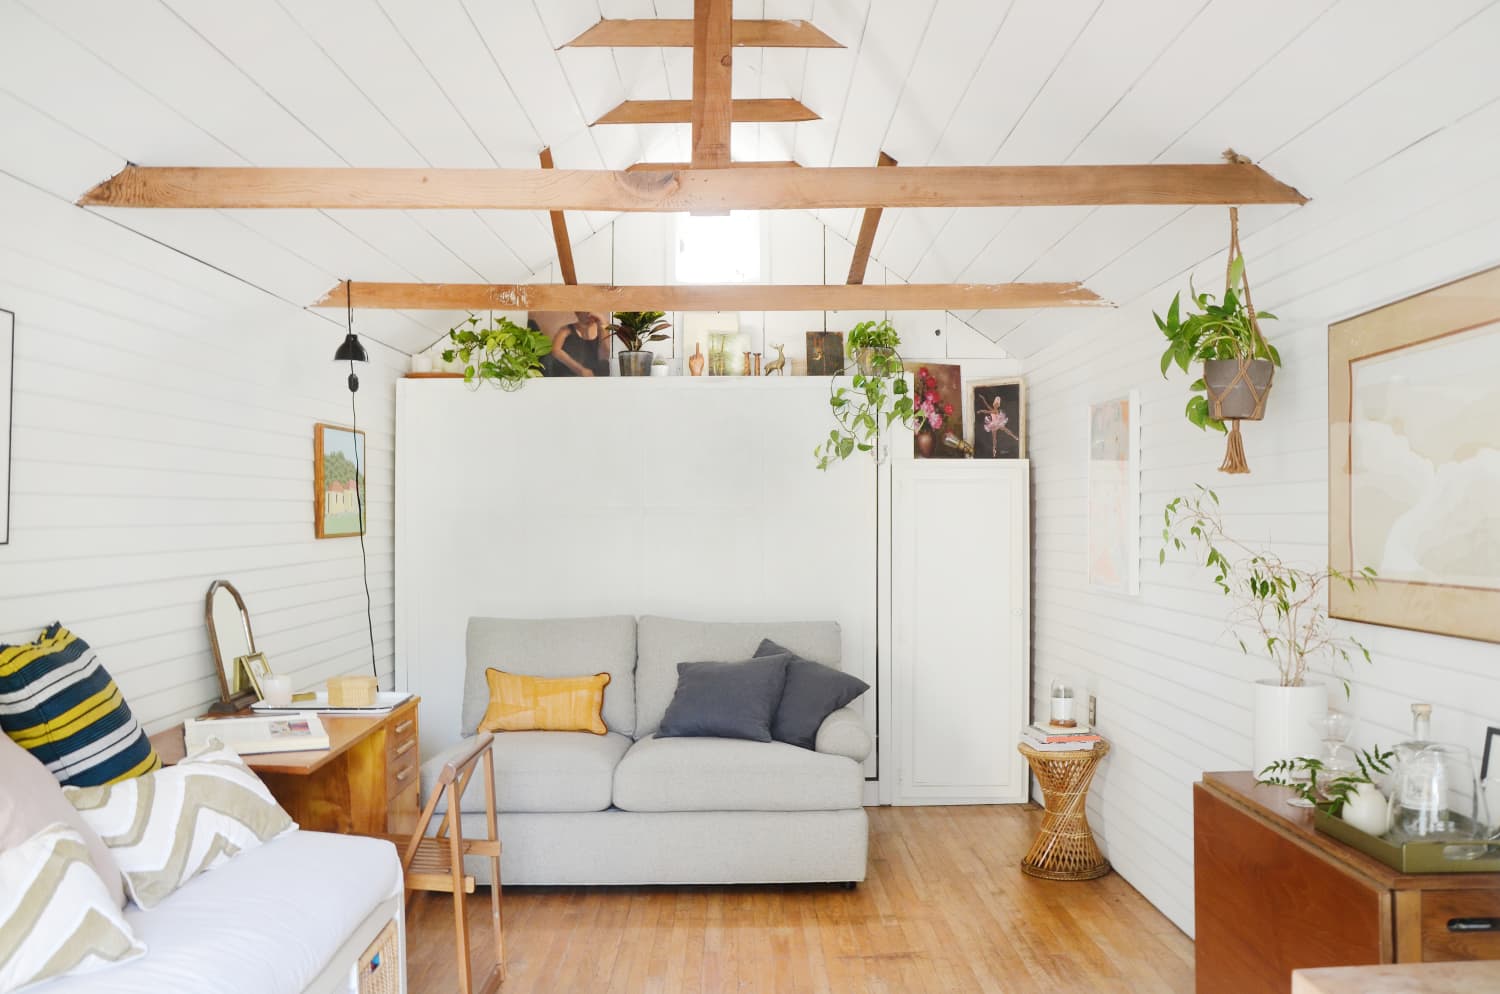 The Best Small Space Organization Solutions—According to People Who Live In Tiny Homes